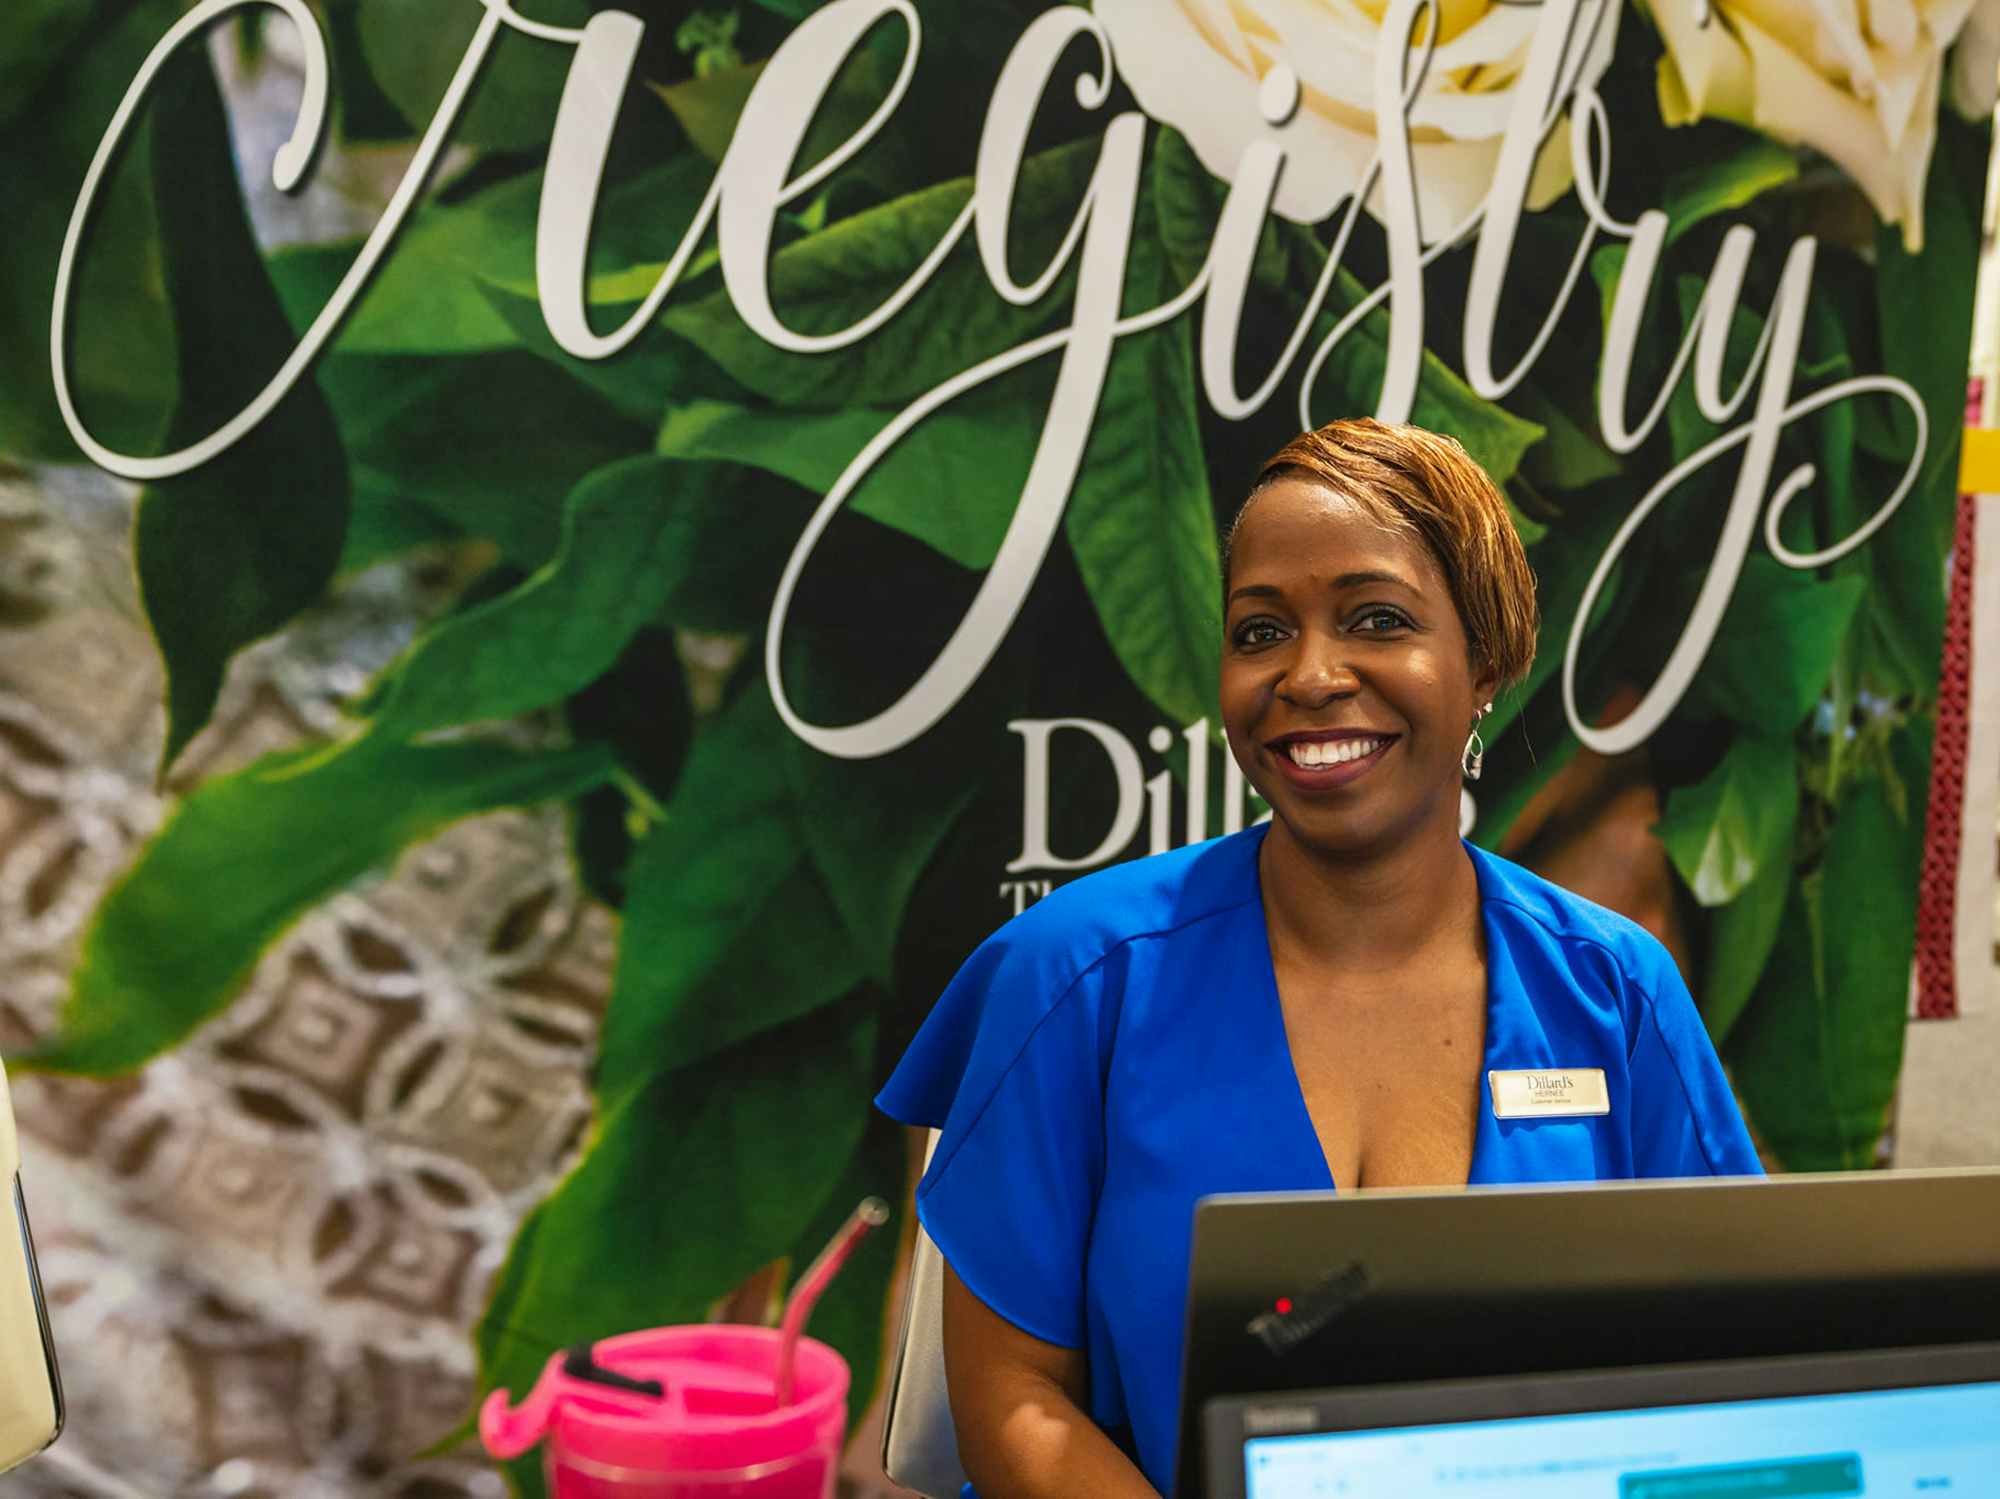 A Dillard's employee smiling and standing at the Registry counter inside Dillard's